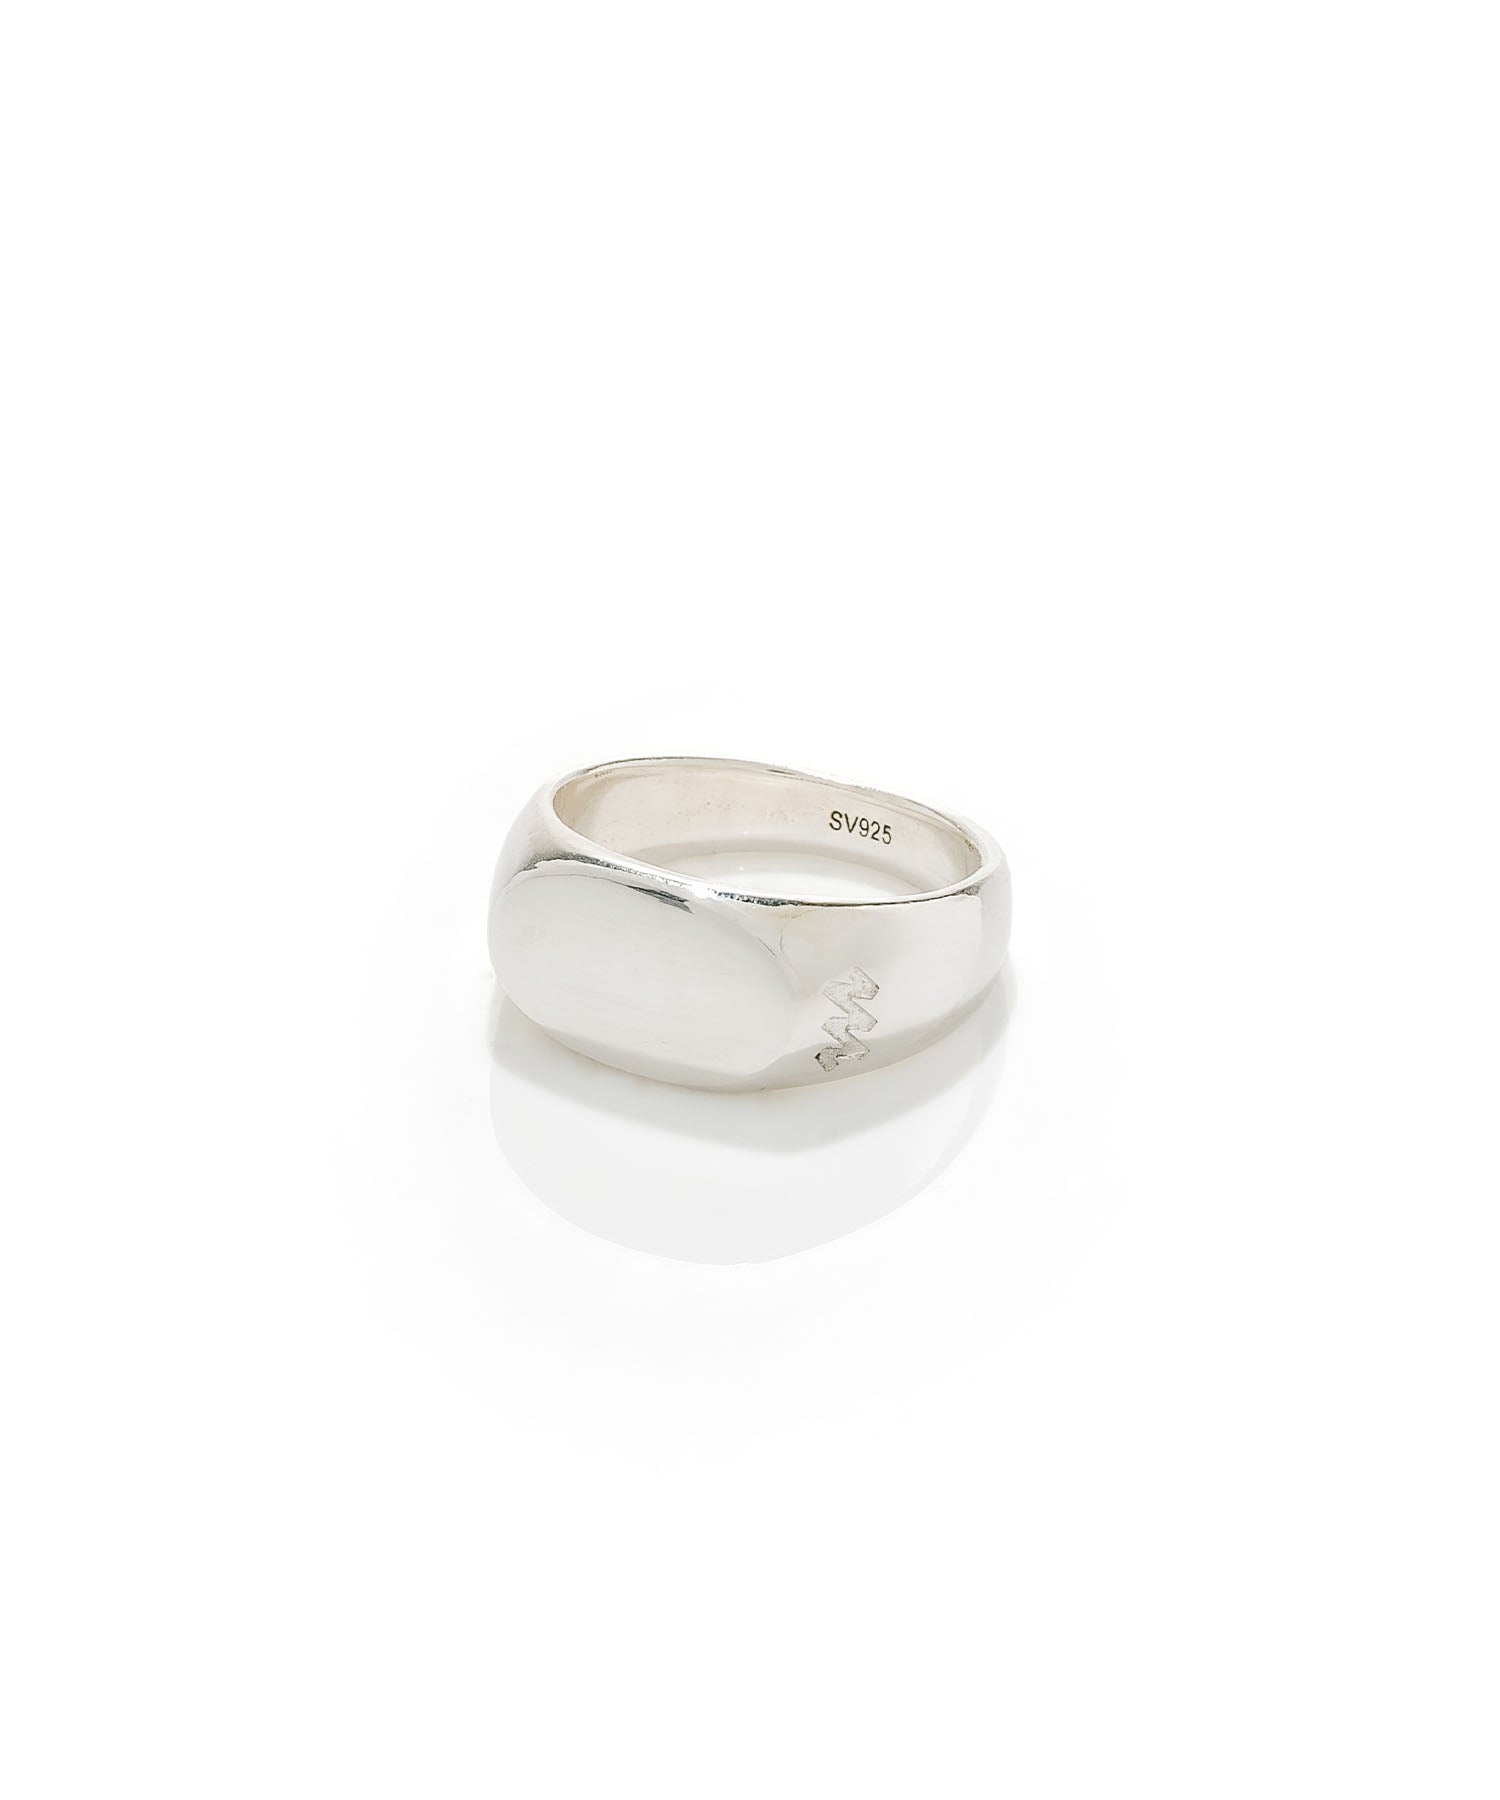 SMALL SIGNET RING